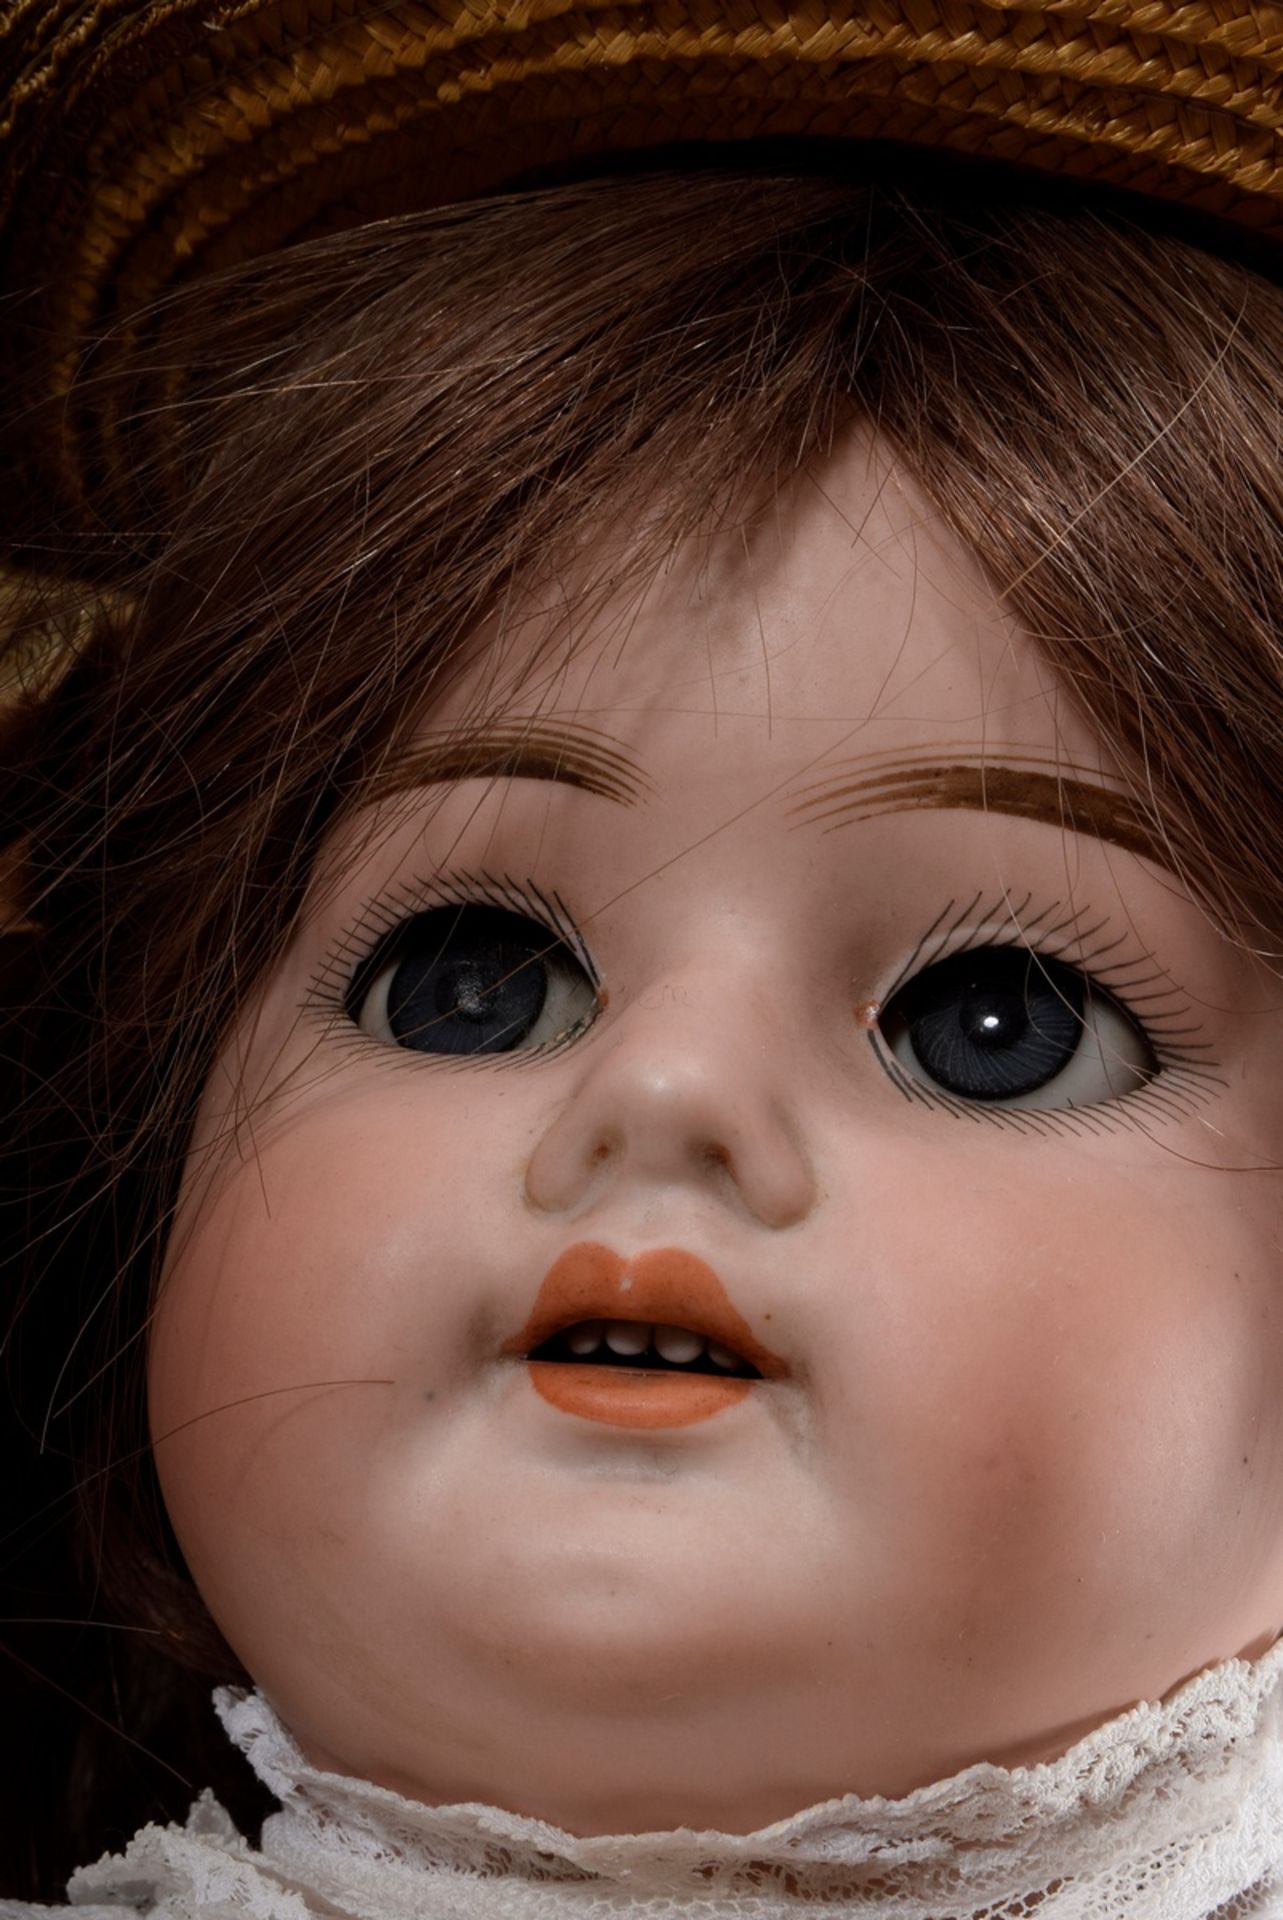 Doll with porcelain crank head and wooden/mass jointed body, brown human hair wig, blue glass eyes, - Image 3 of 10